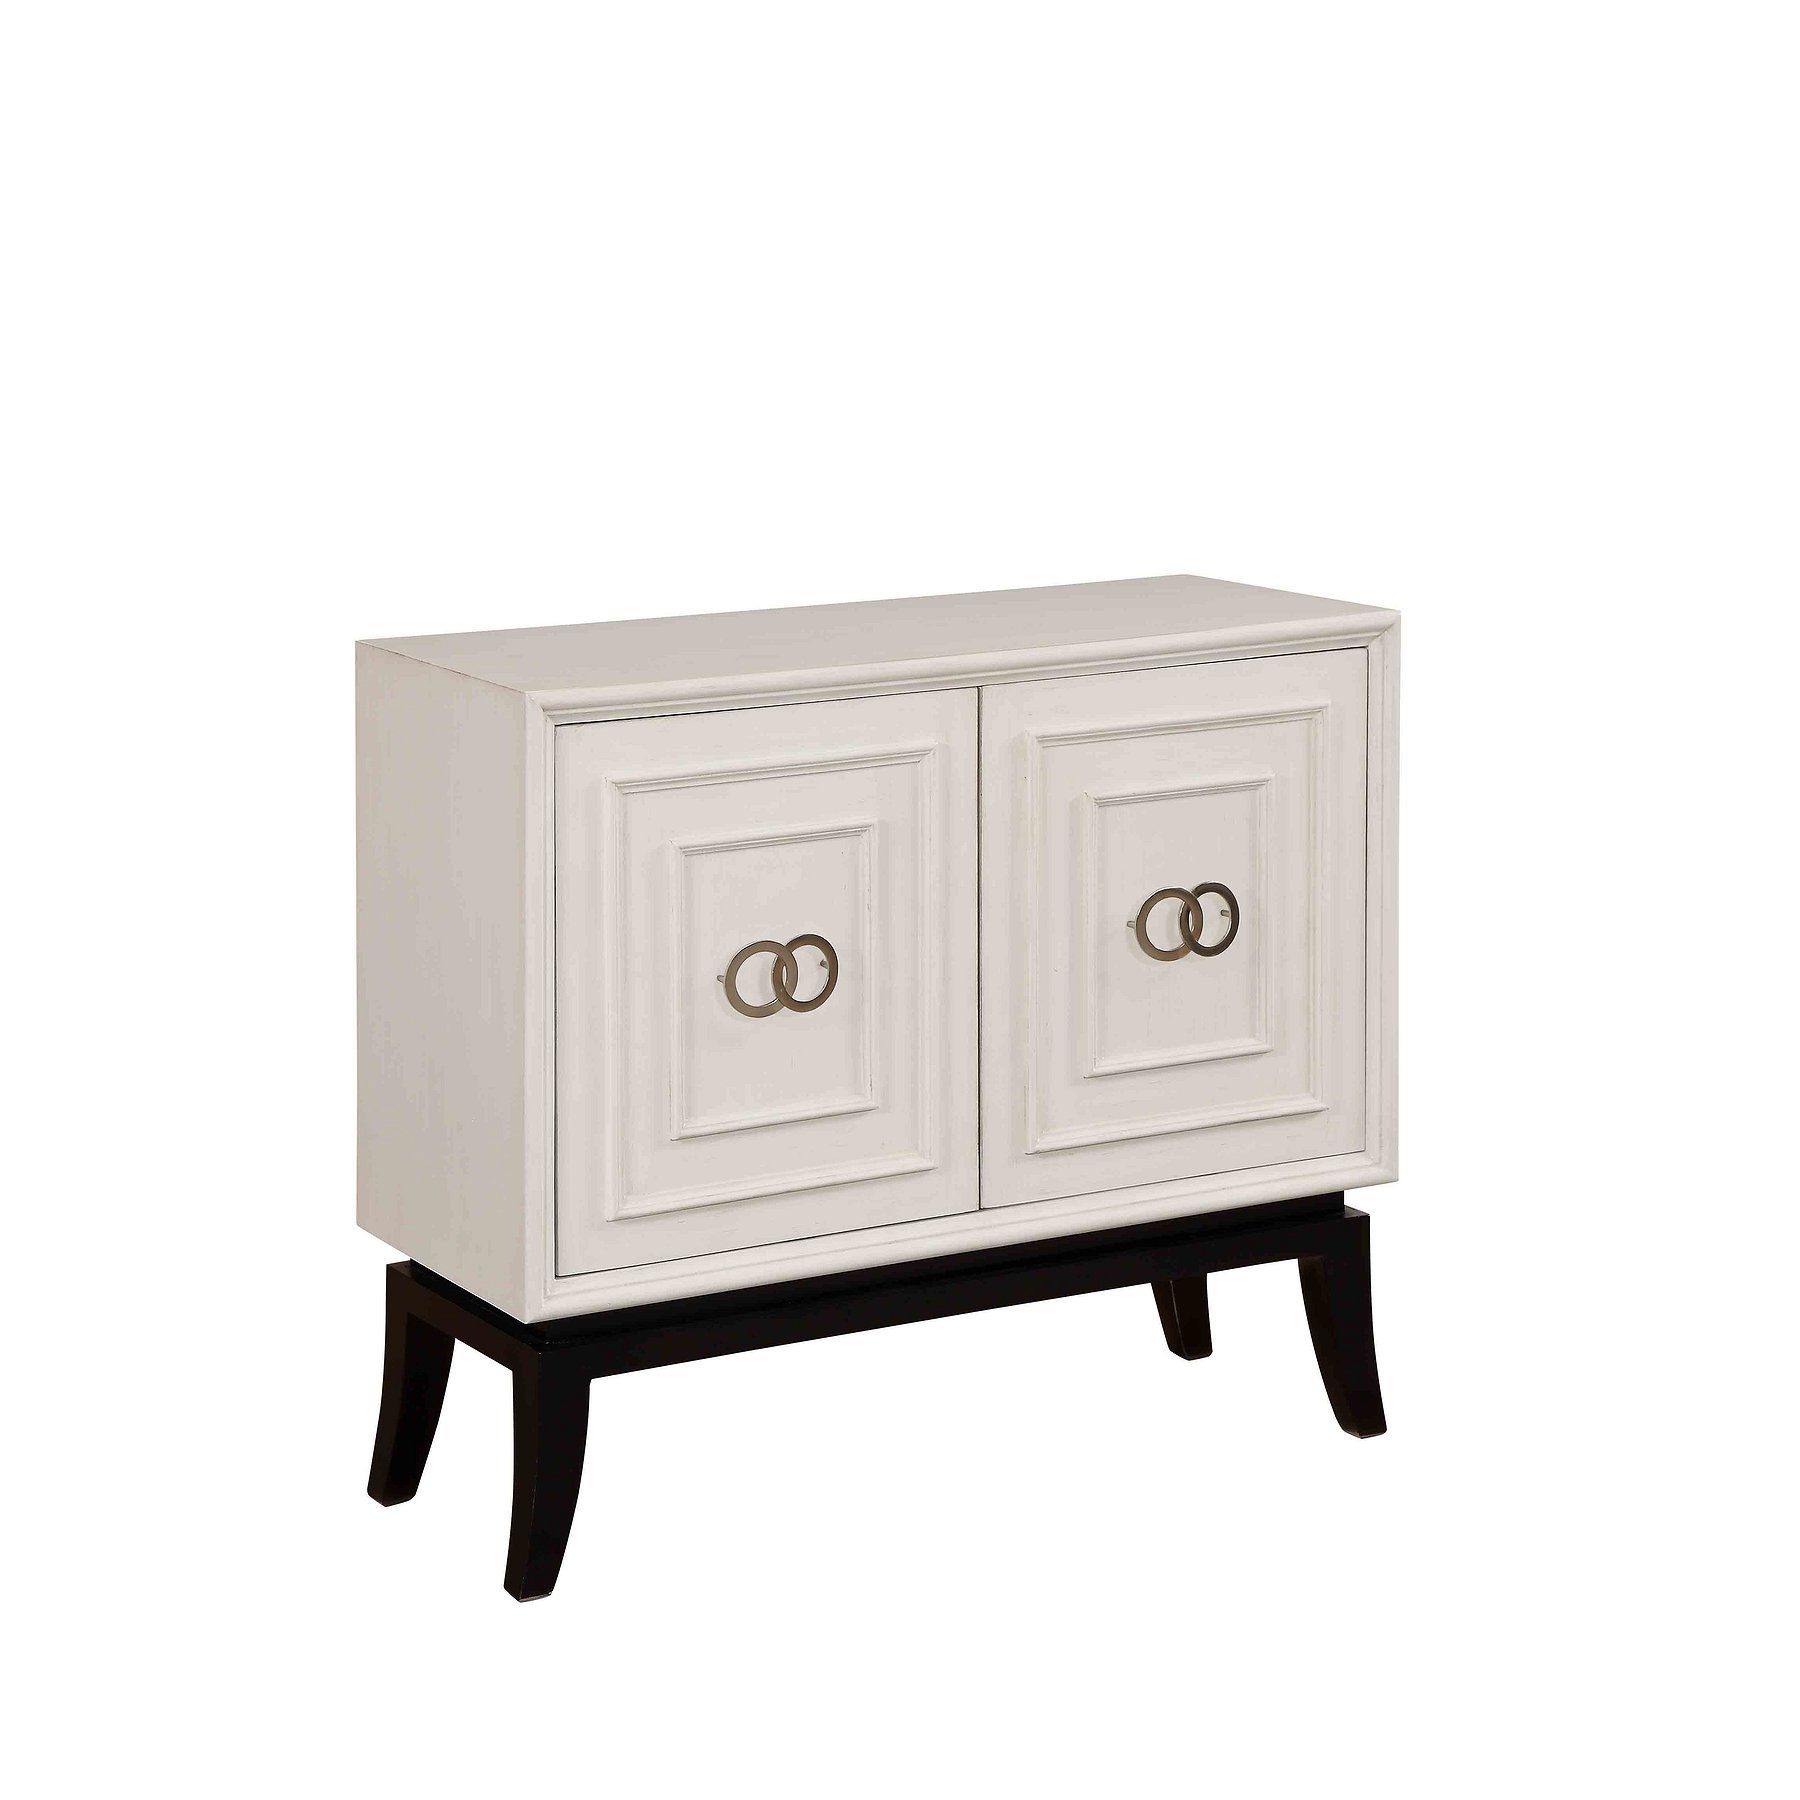 91777 Cabinet Regarding Pale Pink Agate Wood Credenzas (View 19 of 30)